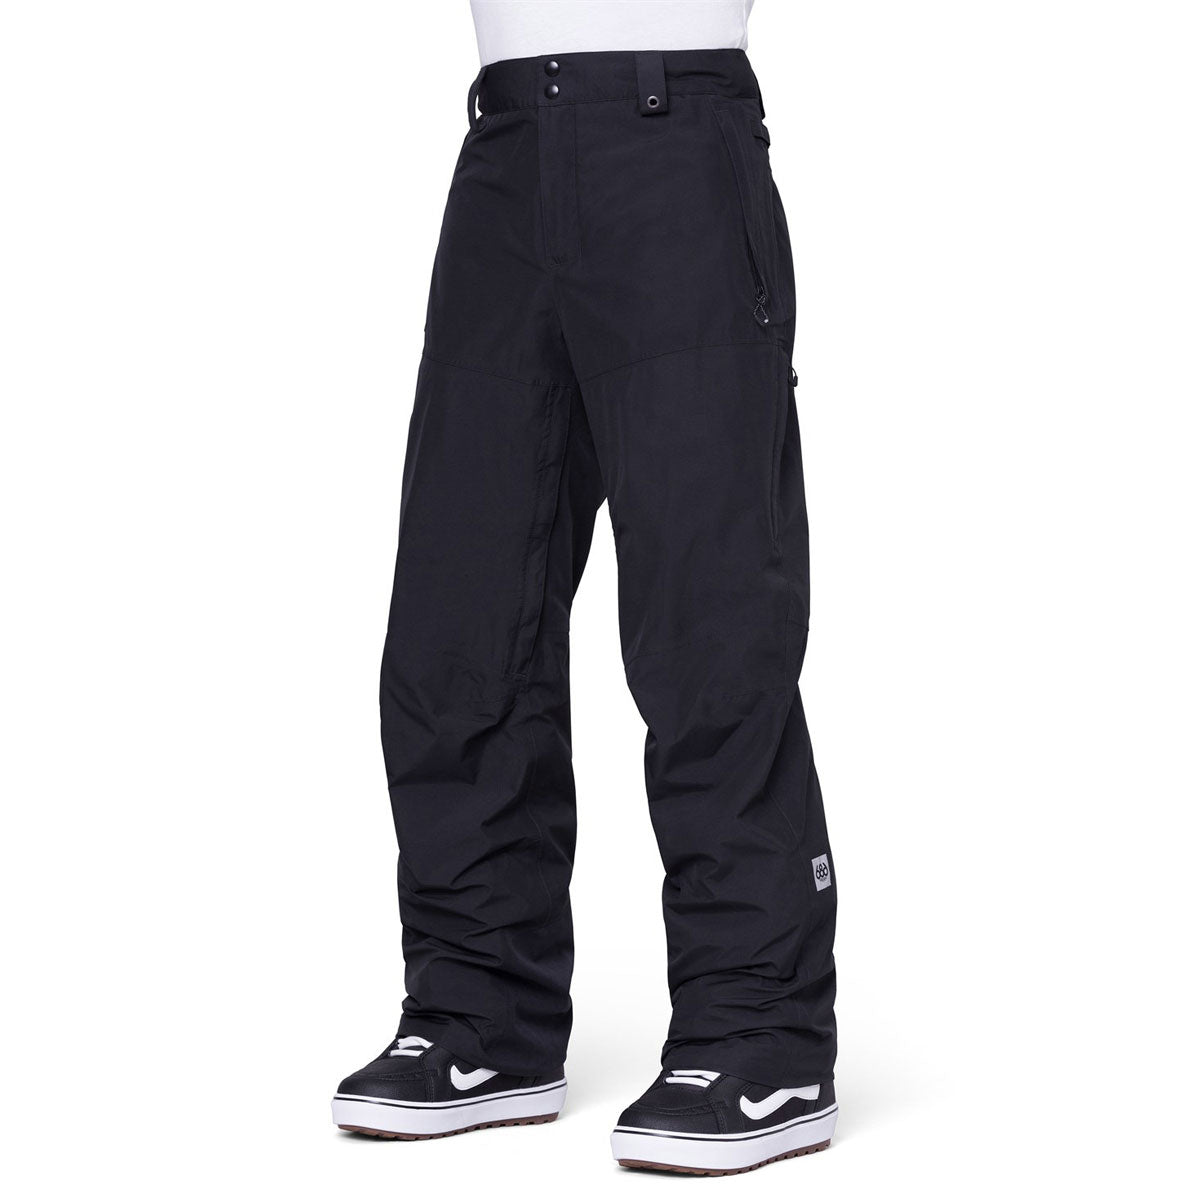 686 Gore-Tex Core Insulated Snowboard Pants - Black image 1